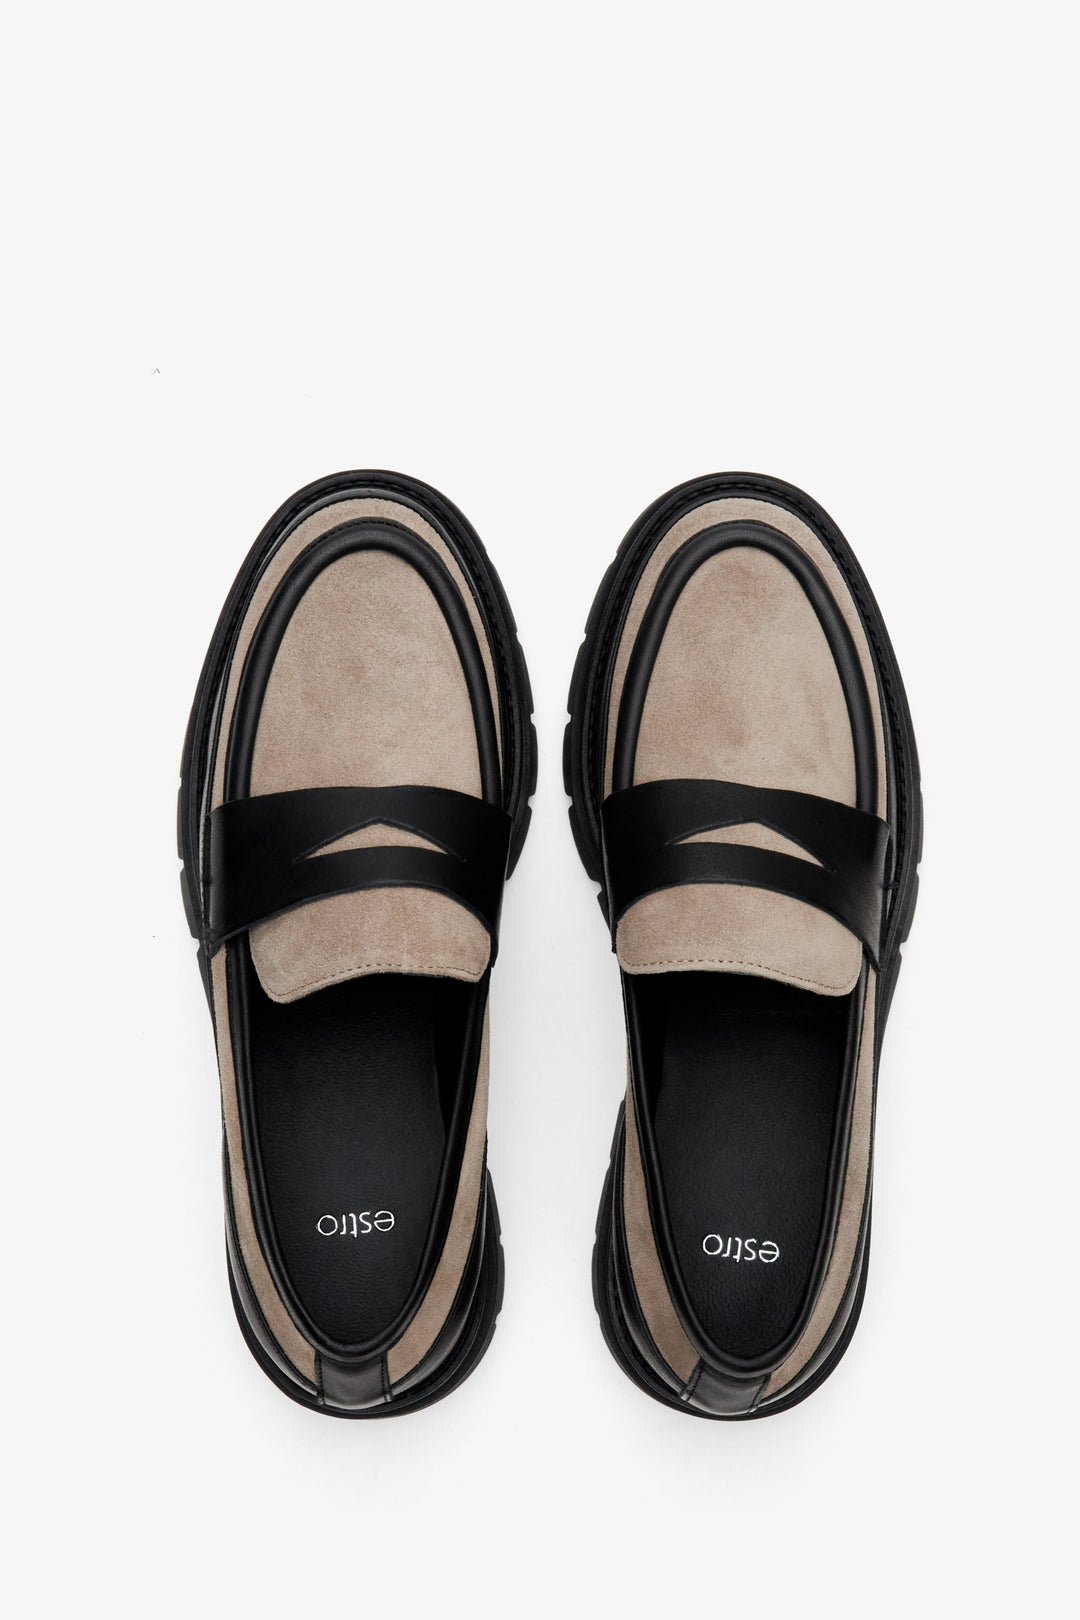 Women's black-and-beige velour -leather moccasins by Estro - top view presentation of the footwear.